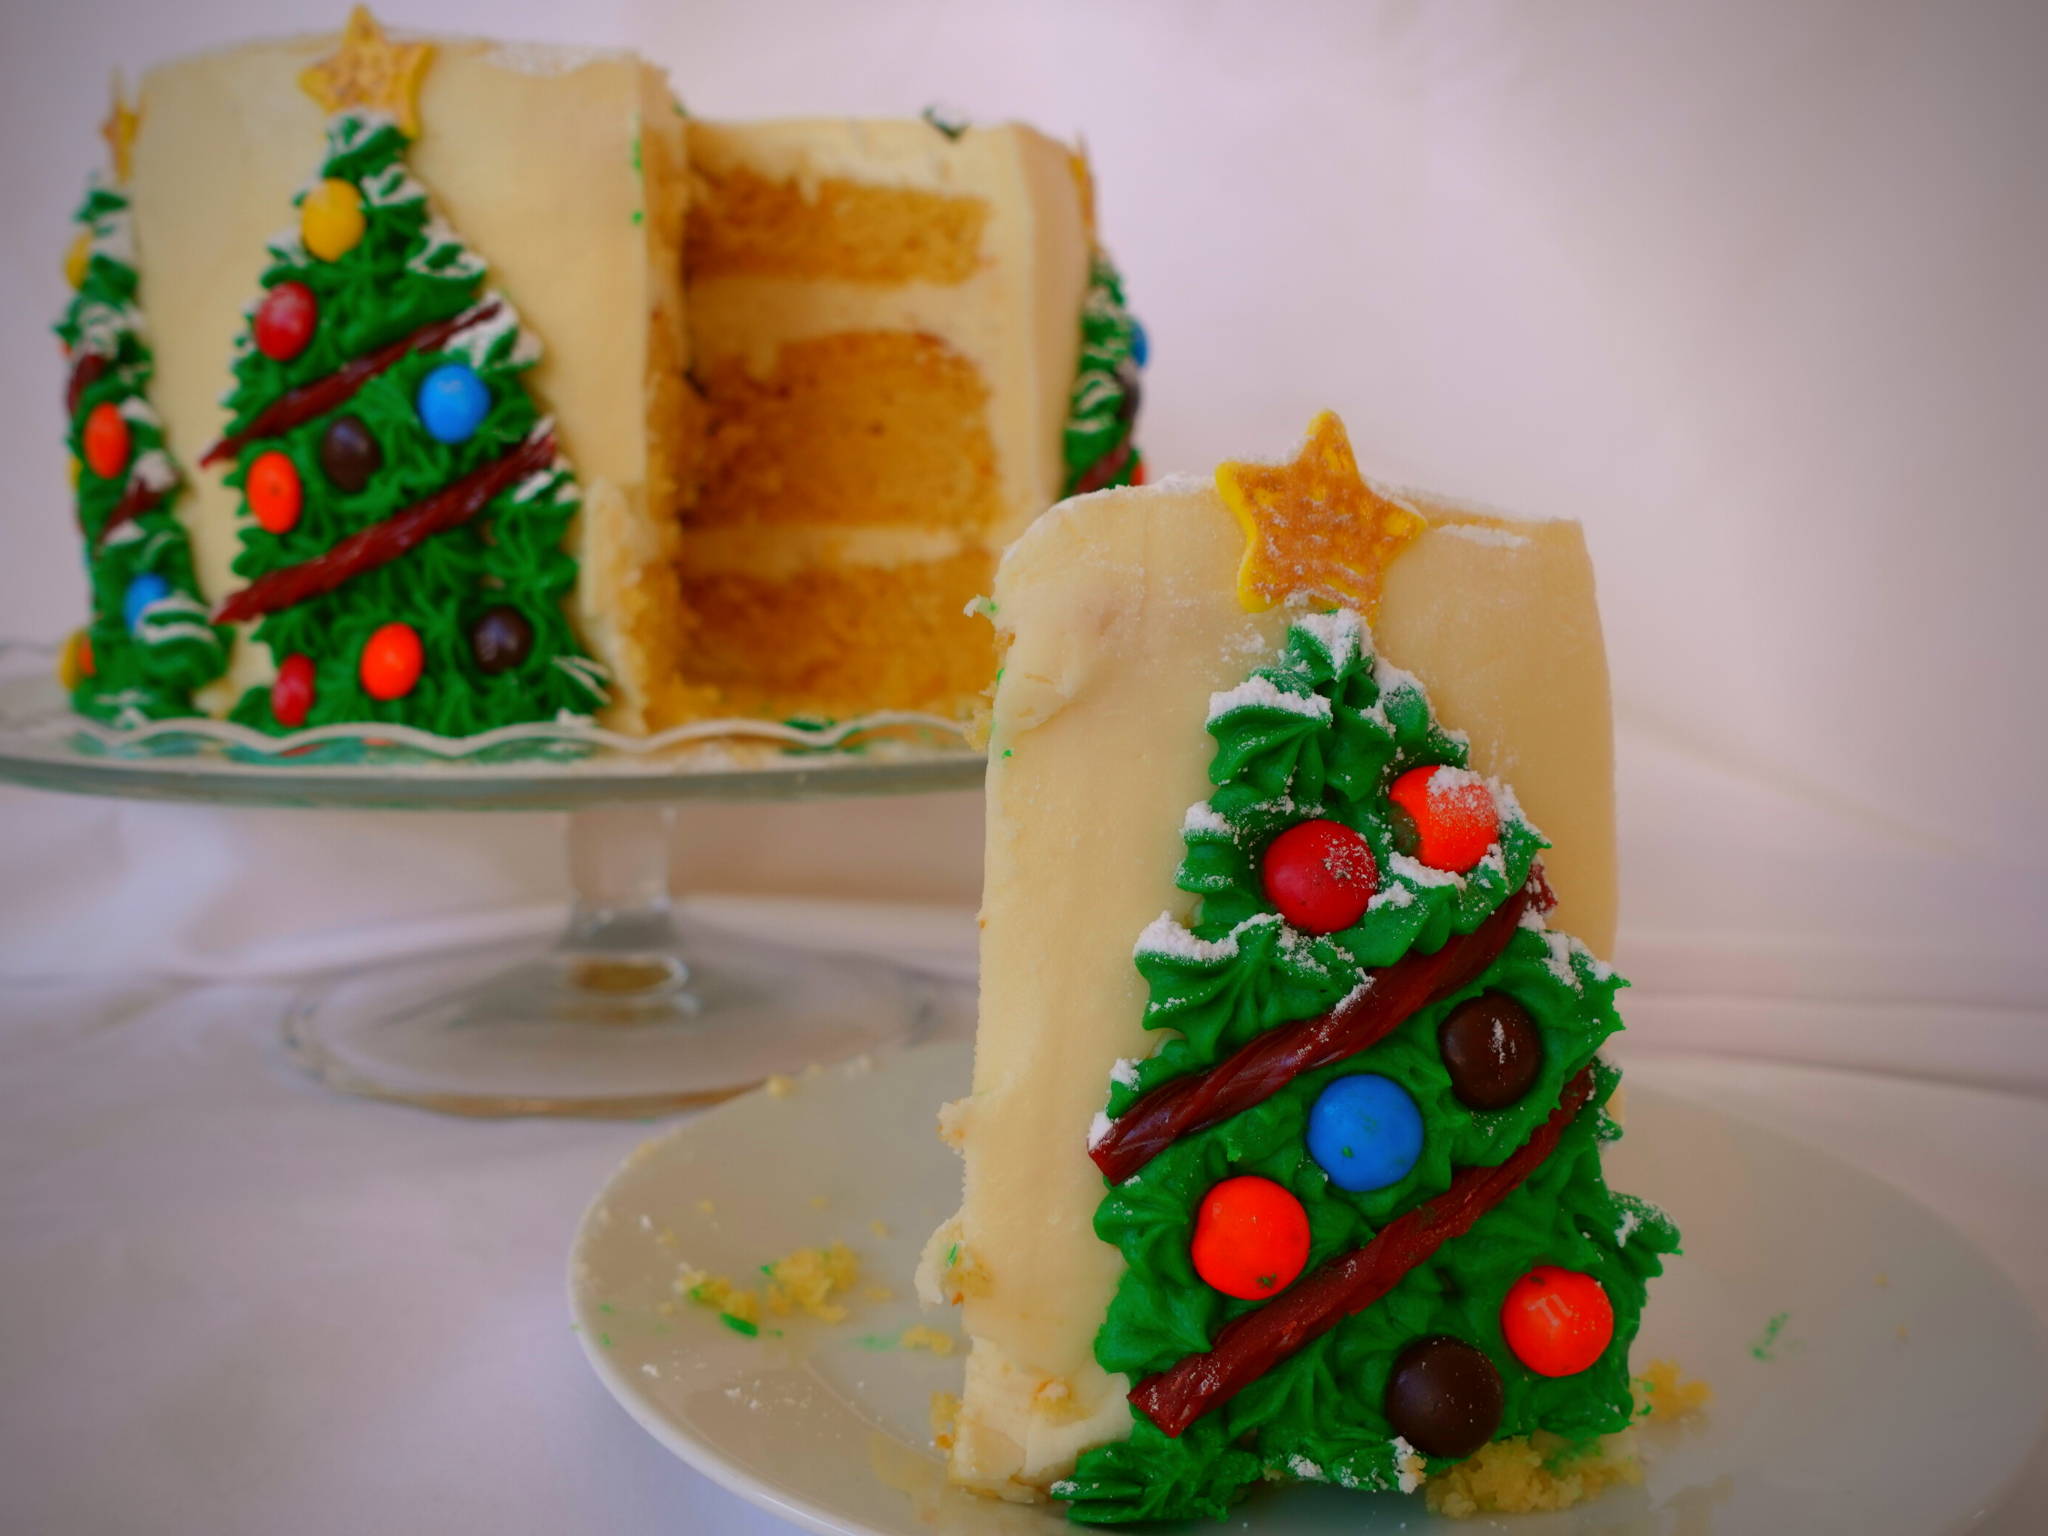 https://theflyingkitchen.com/wp-content/uploads/2022/12/Christmas-Tree-Cake-2.png